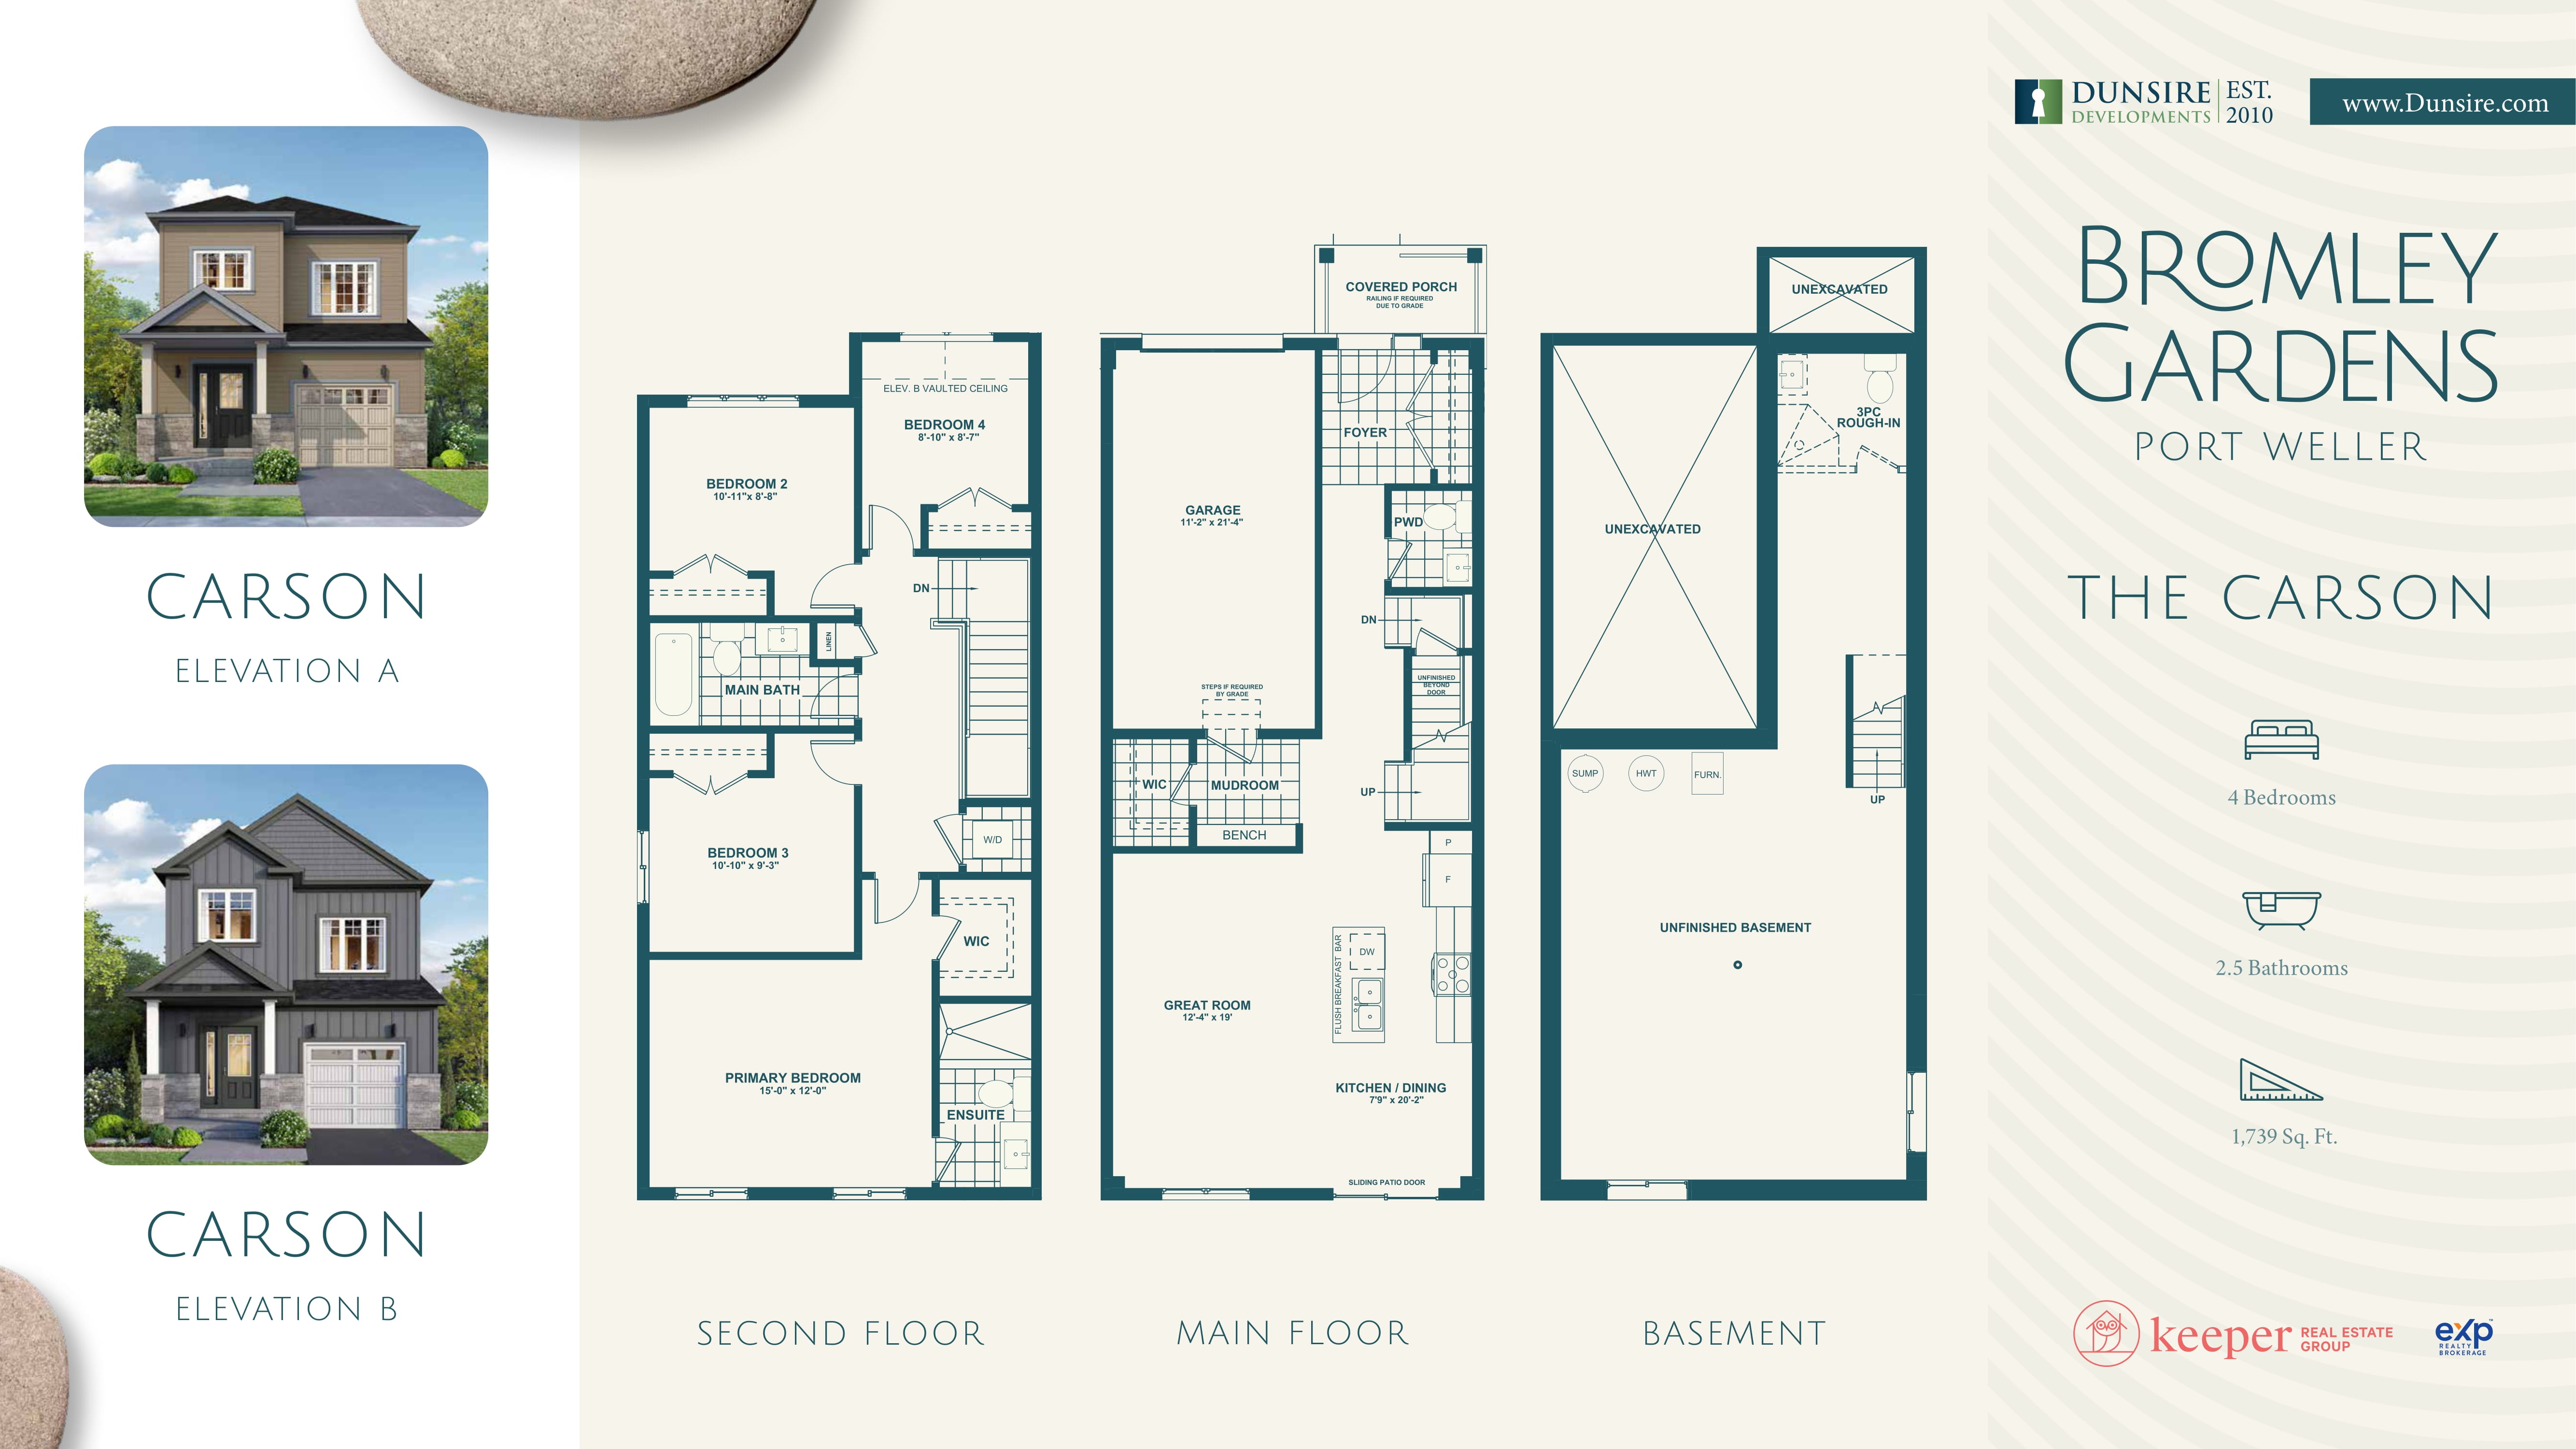  Floor Plan of Bromley Gardens with undefined beds